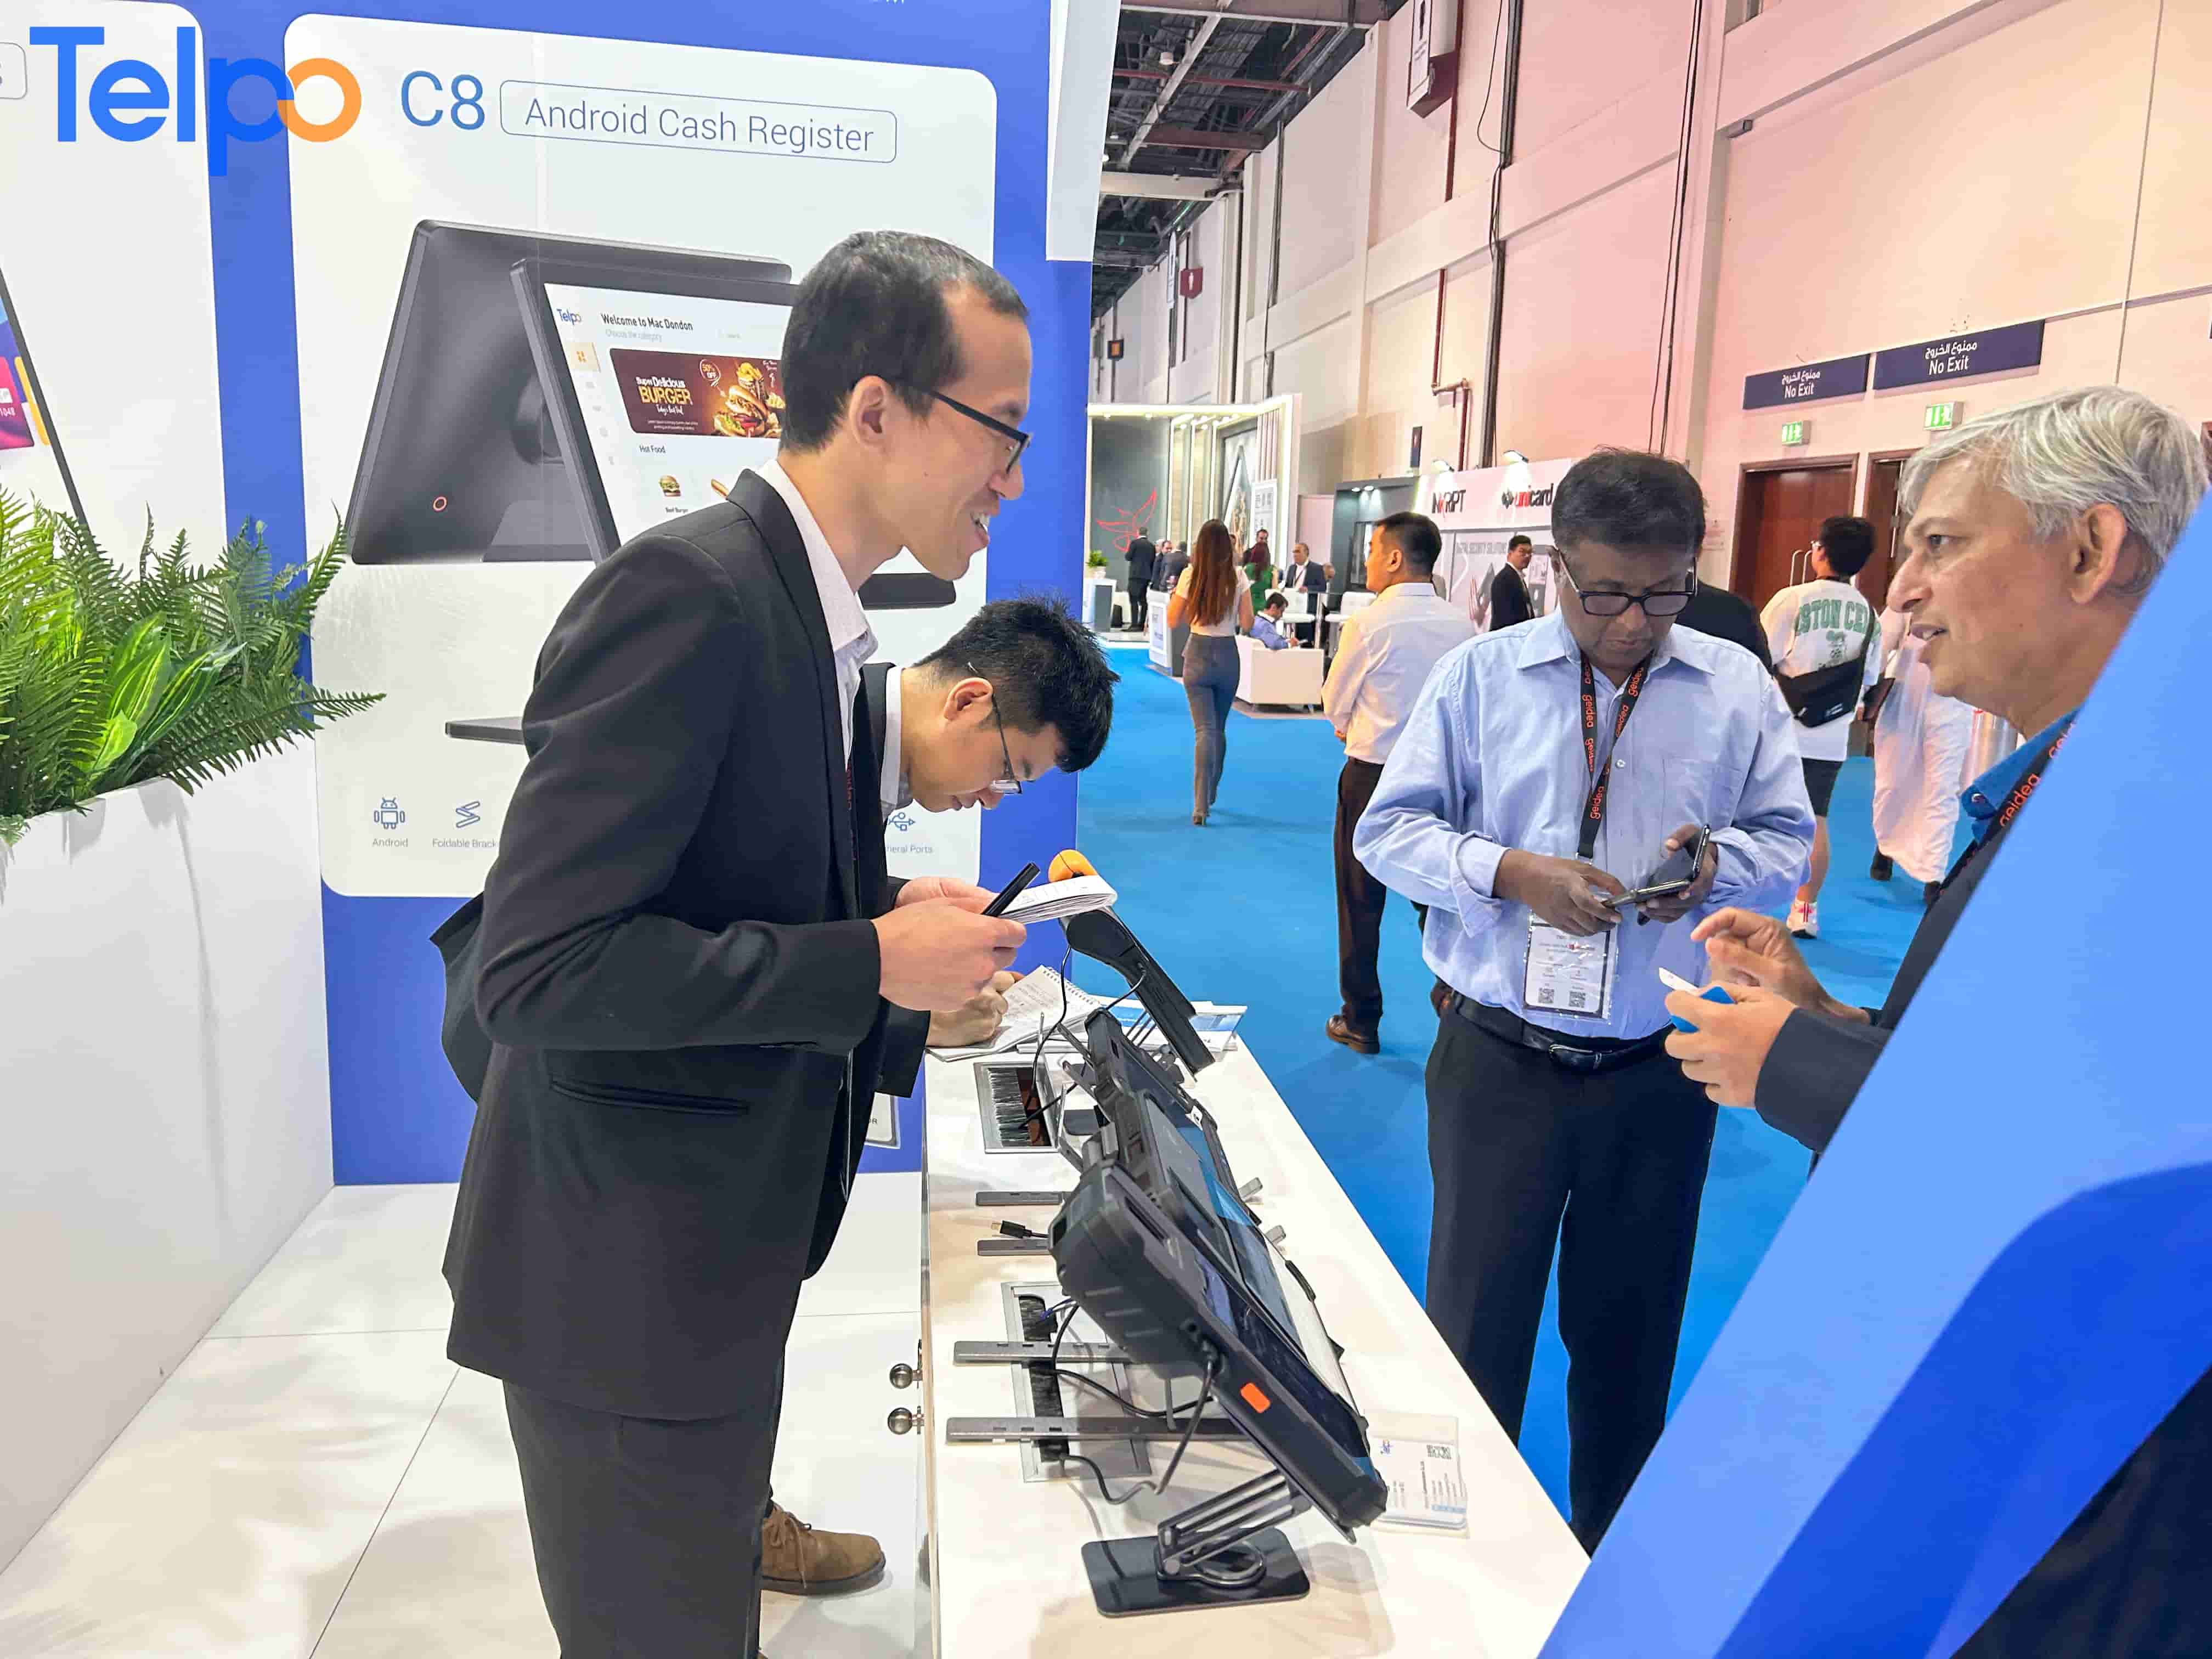 Visitors are interested in Telpo smart payment terminals